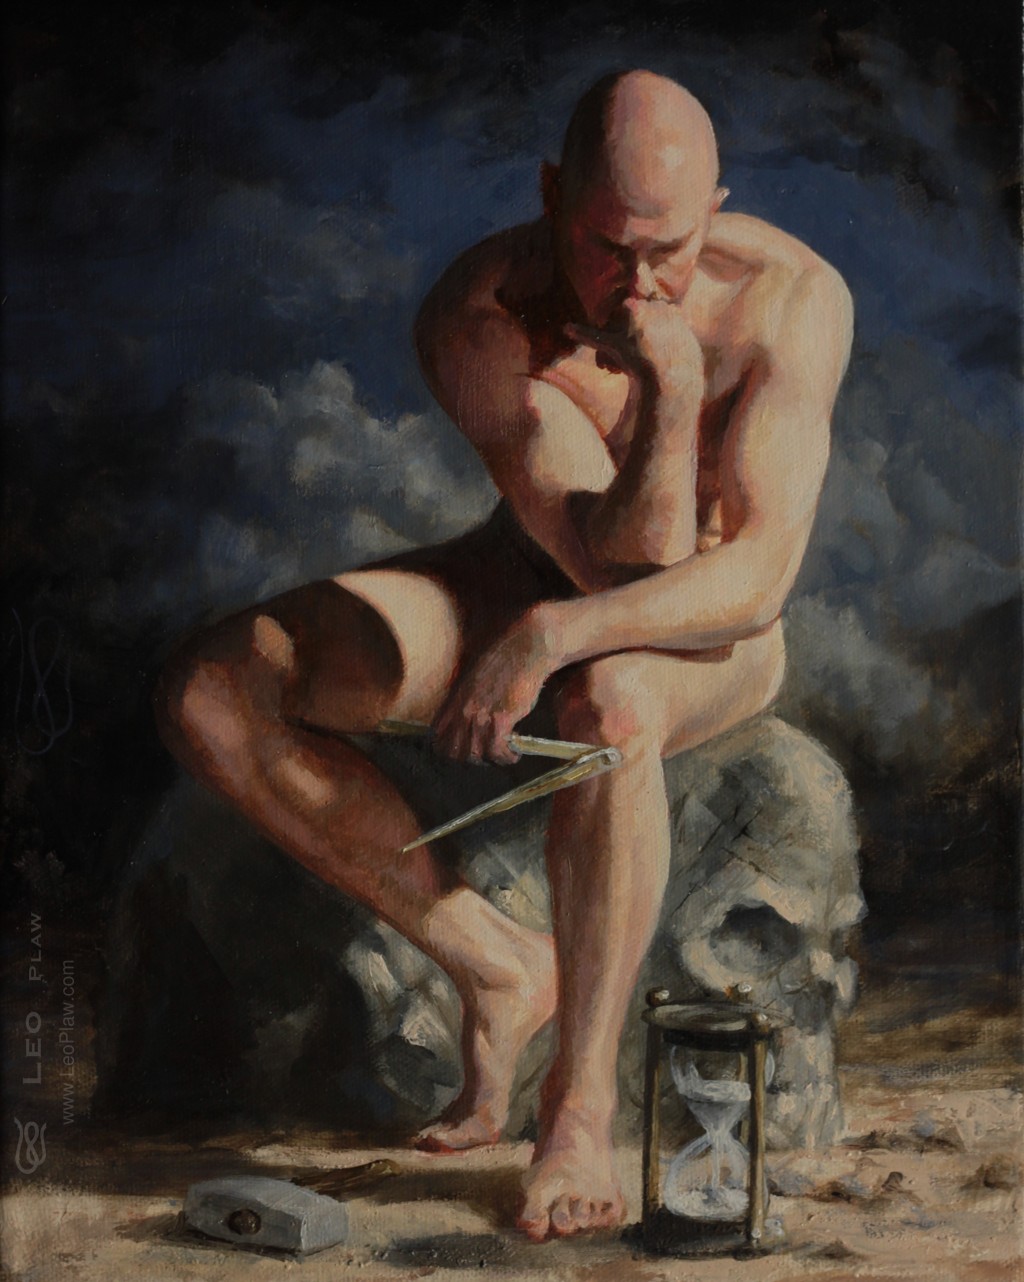 "Making Time", Leo Plaw, 24 x 30cm, oil on canvas